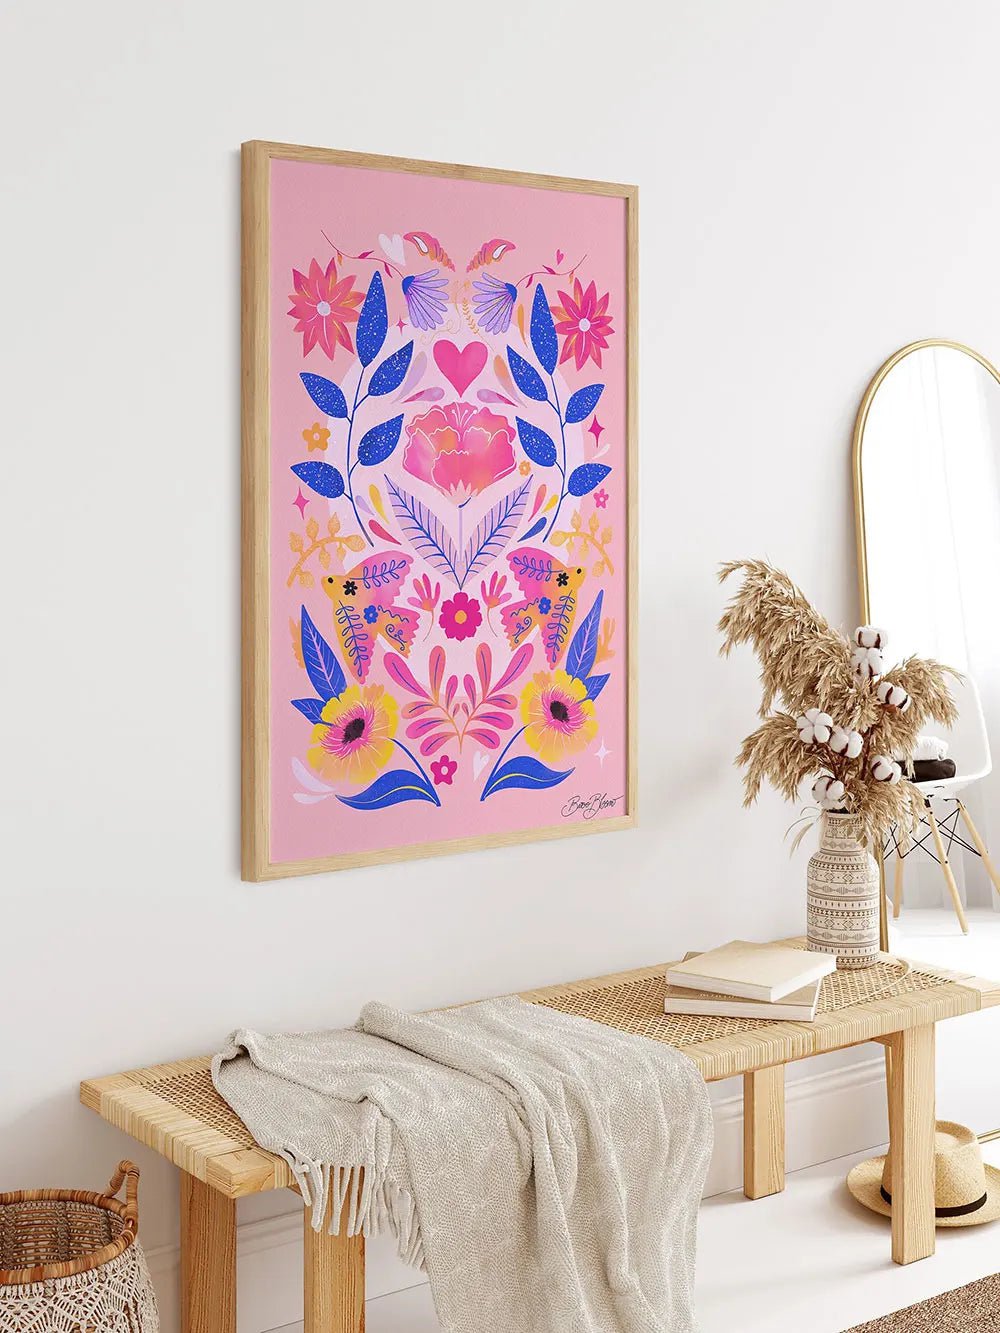 Maximalist Art Poster: Pink Floral Wall Art Canvas for Modern Living Room and Bedroom Decor AHP0380-9 / 20x30cm No Frame